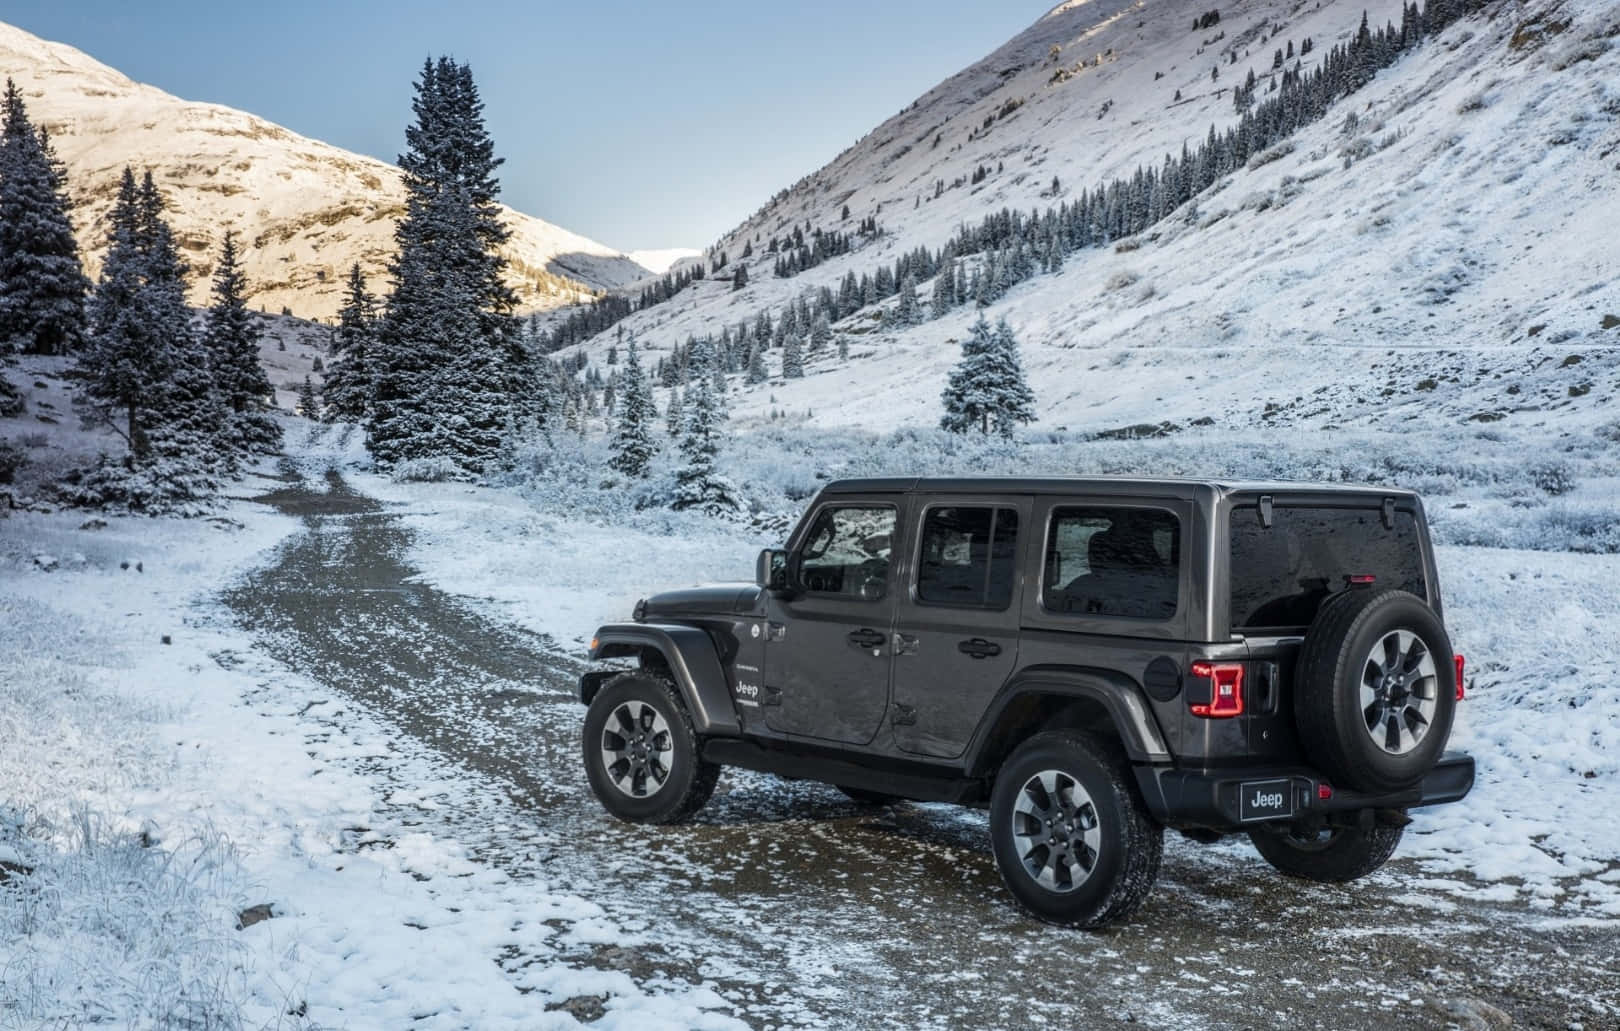 The 2019 Jeep Wrangler Is Driving Down A Snowy Road